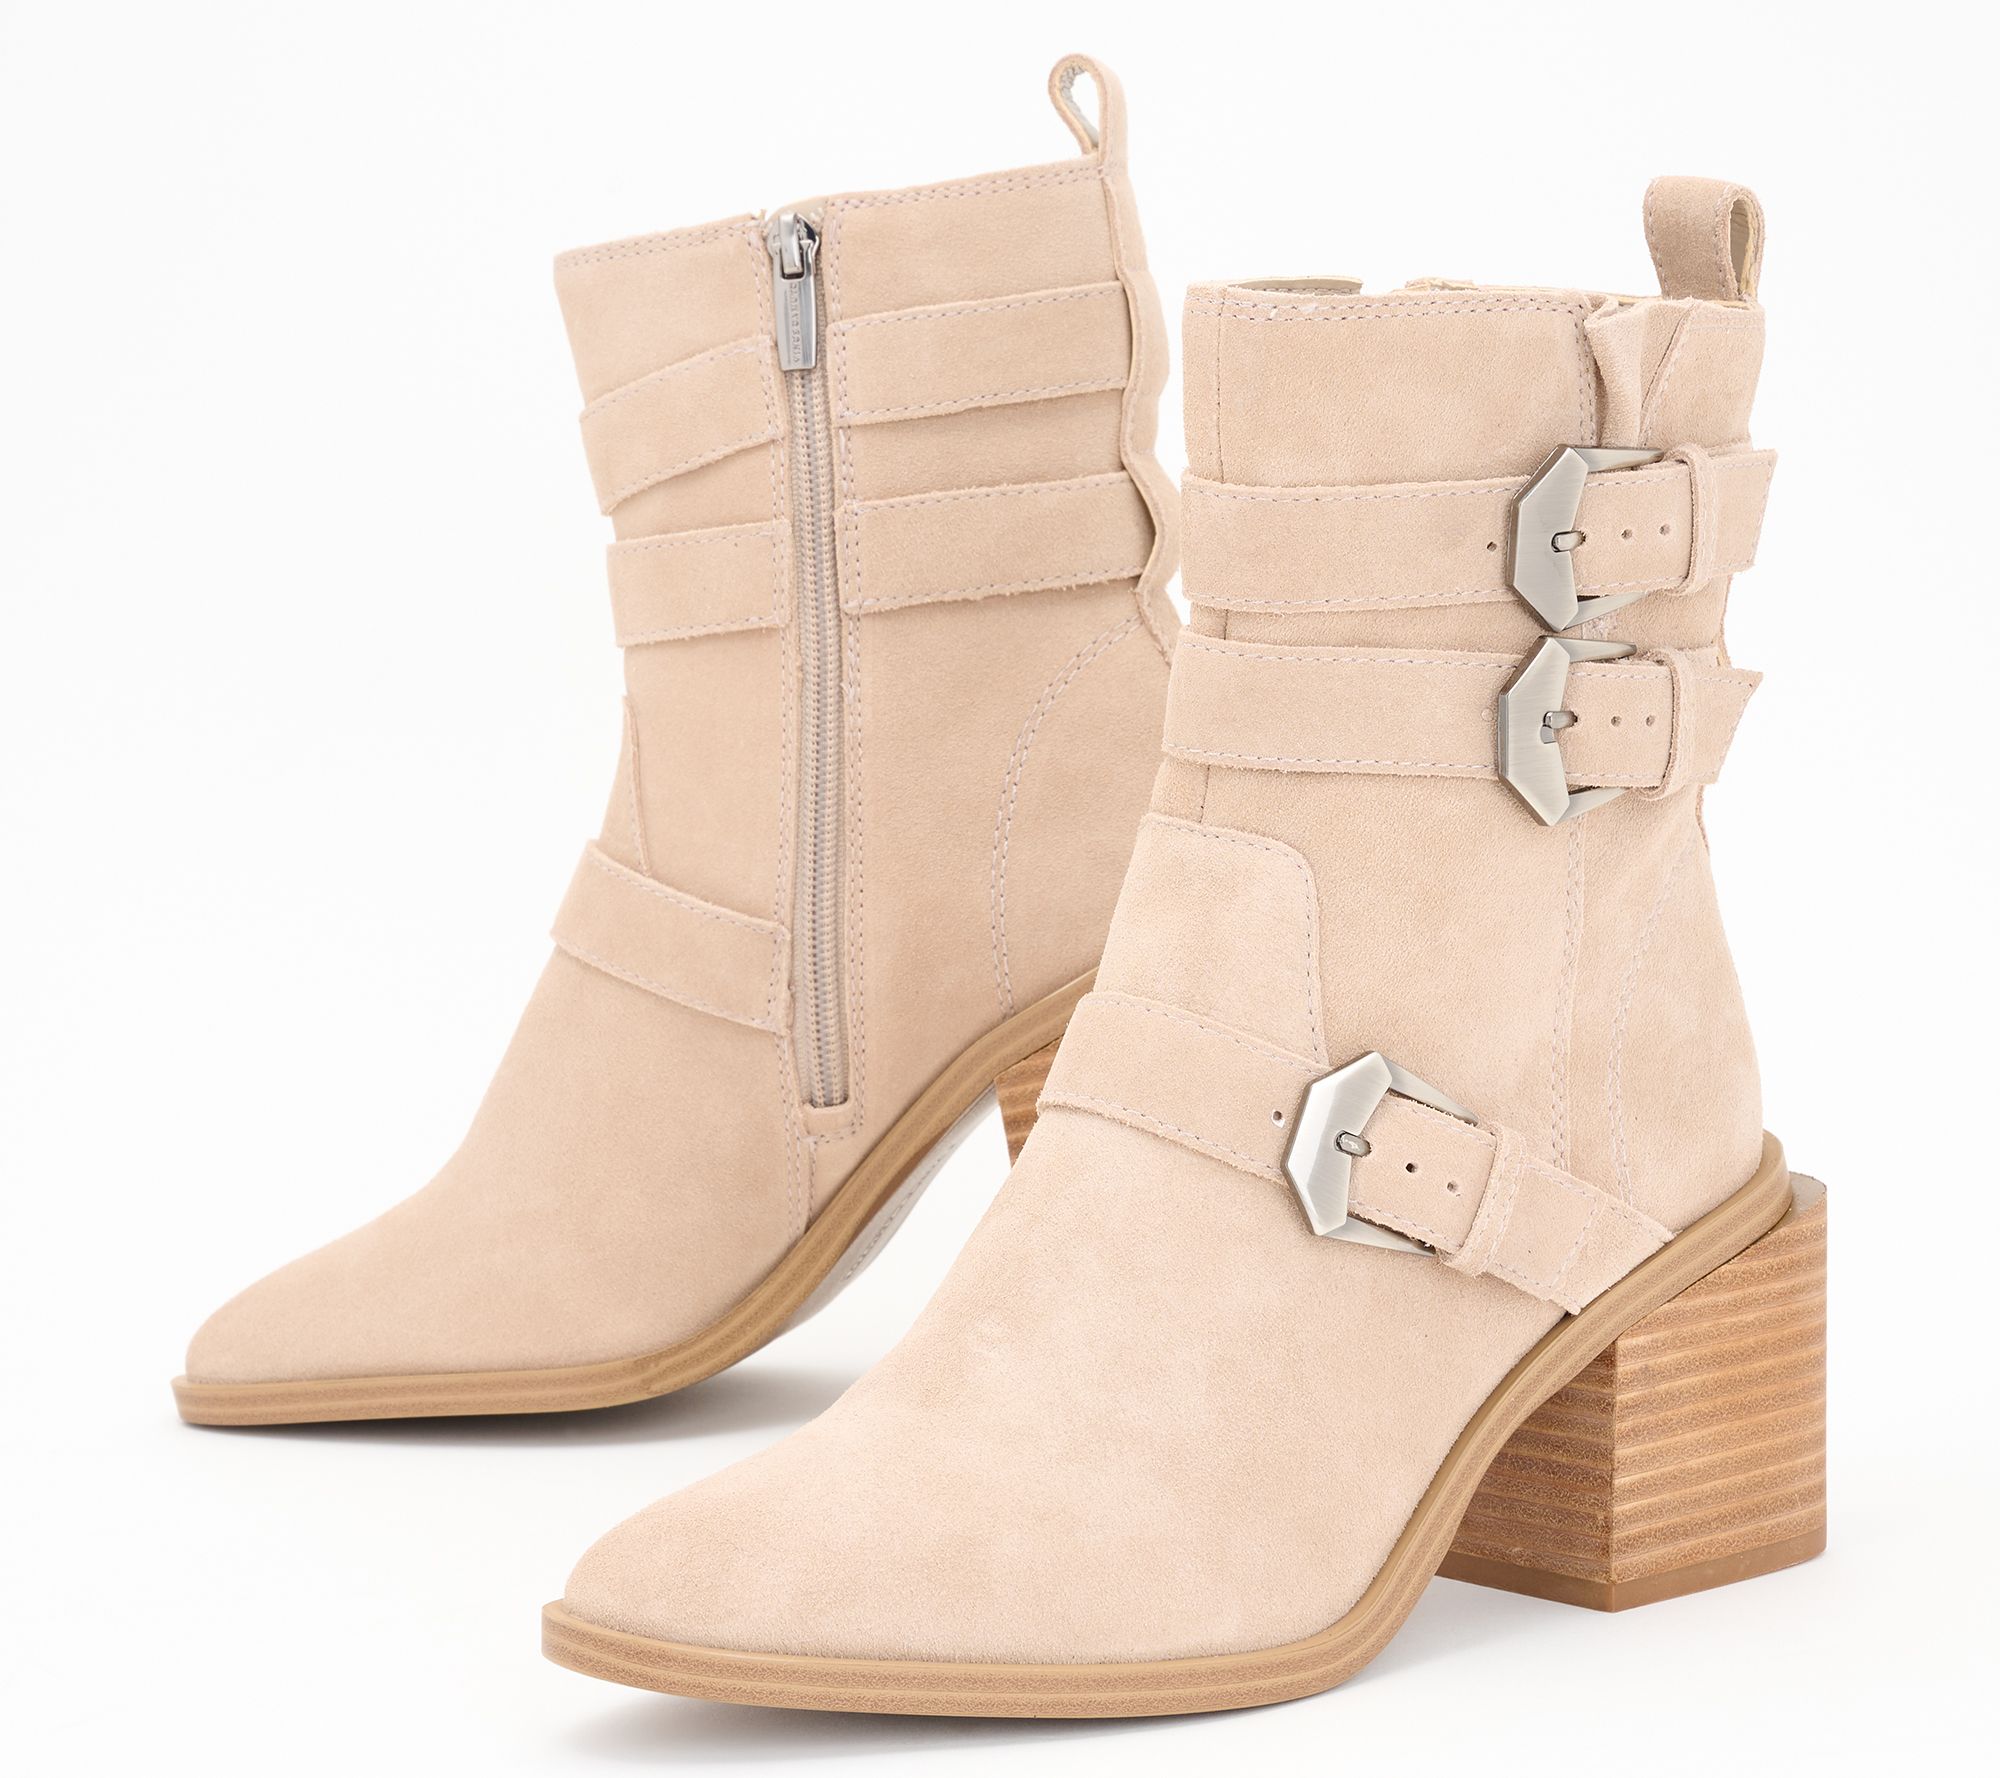 The Best Fall Shoes From Vince Camuto